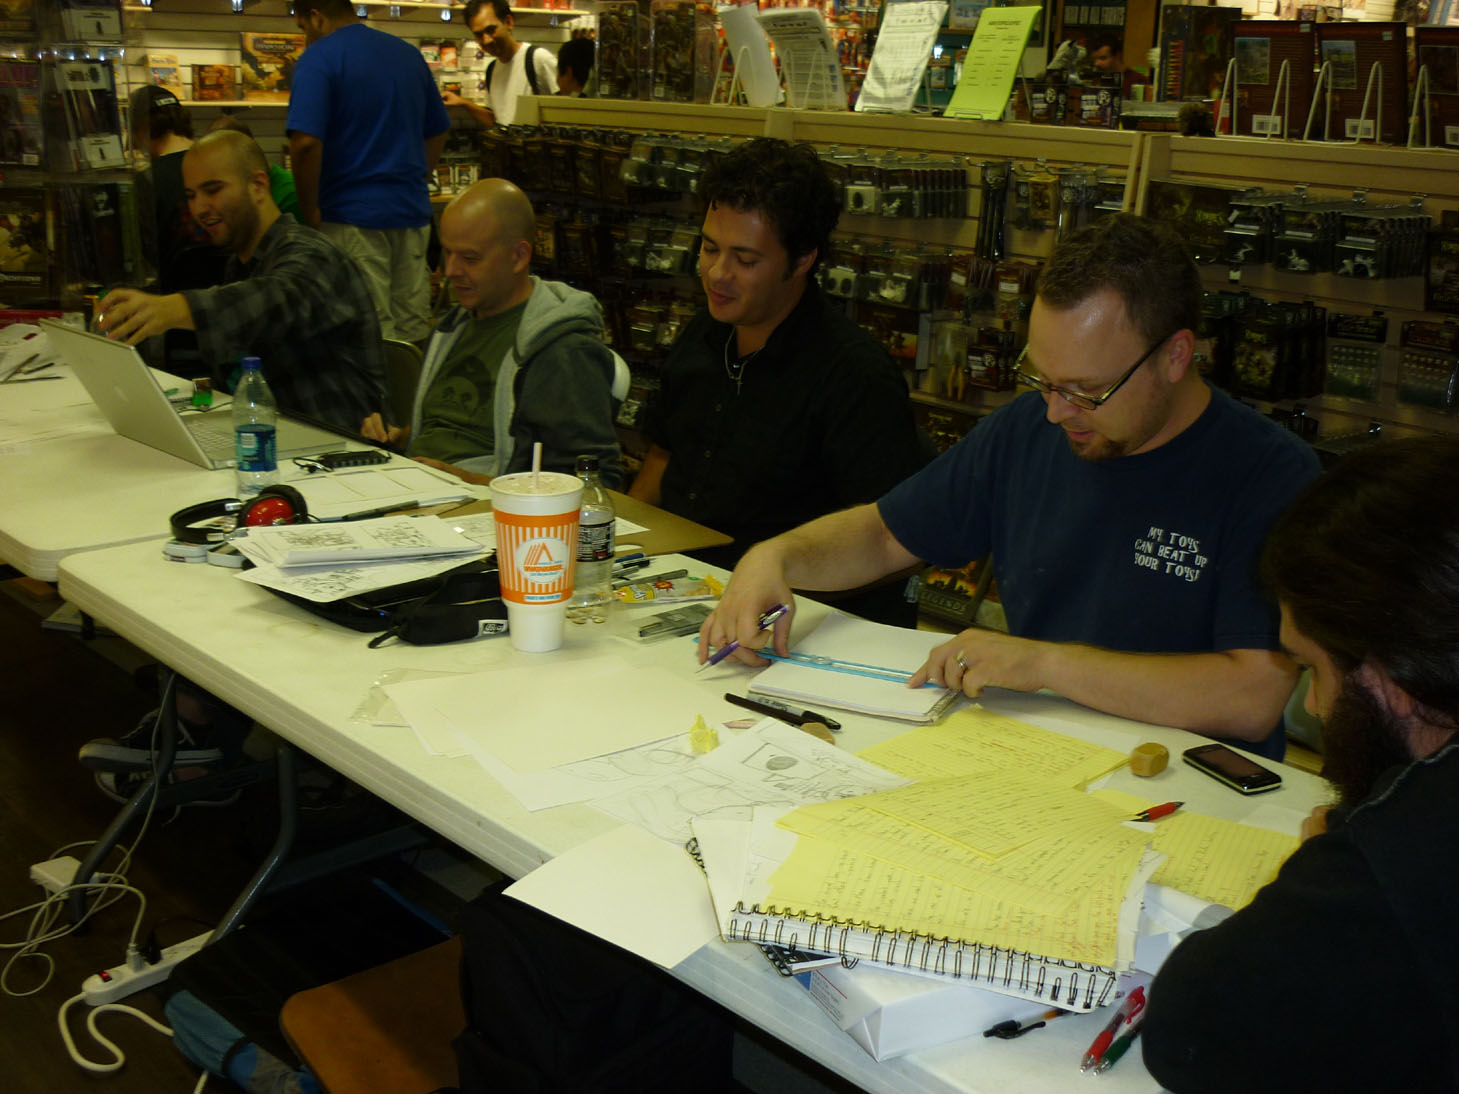 (L. to R) Bonn Adame, Erik Kuntz, Justin Rogers and Jeremy Guyton create at their table during 24 Hour Comics Day in Austin, Texas.